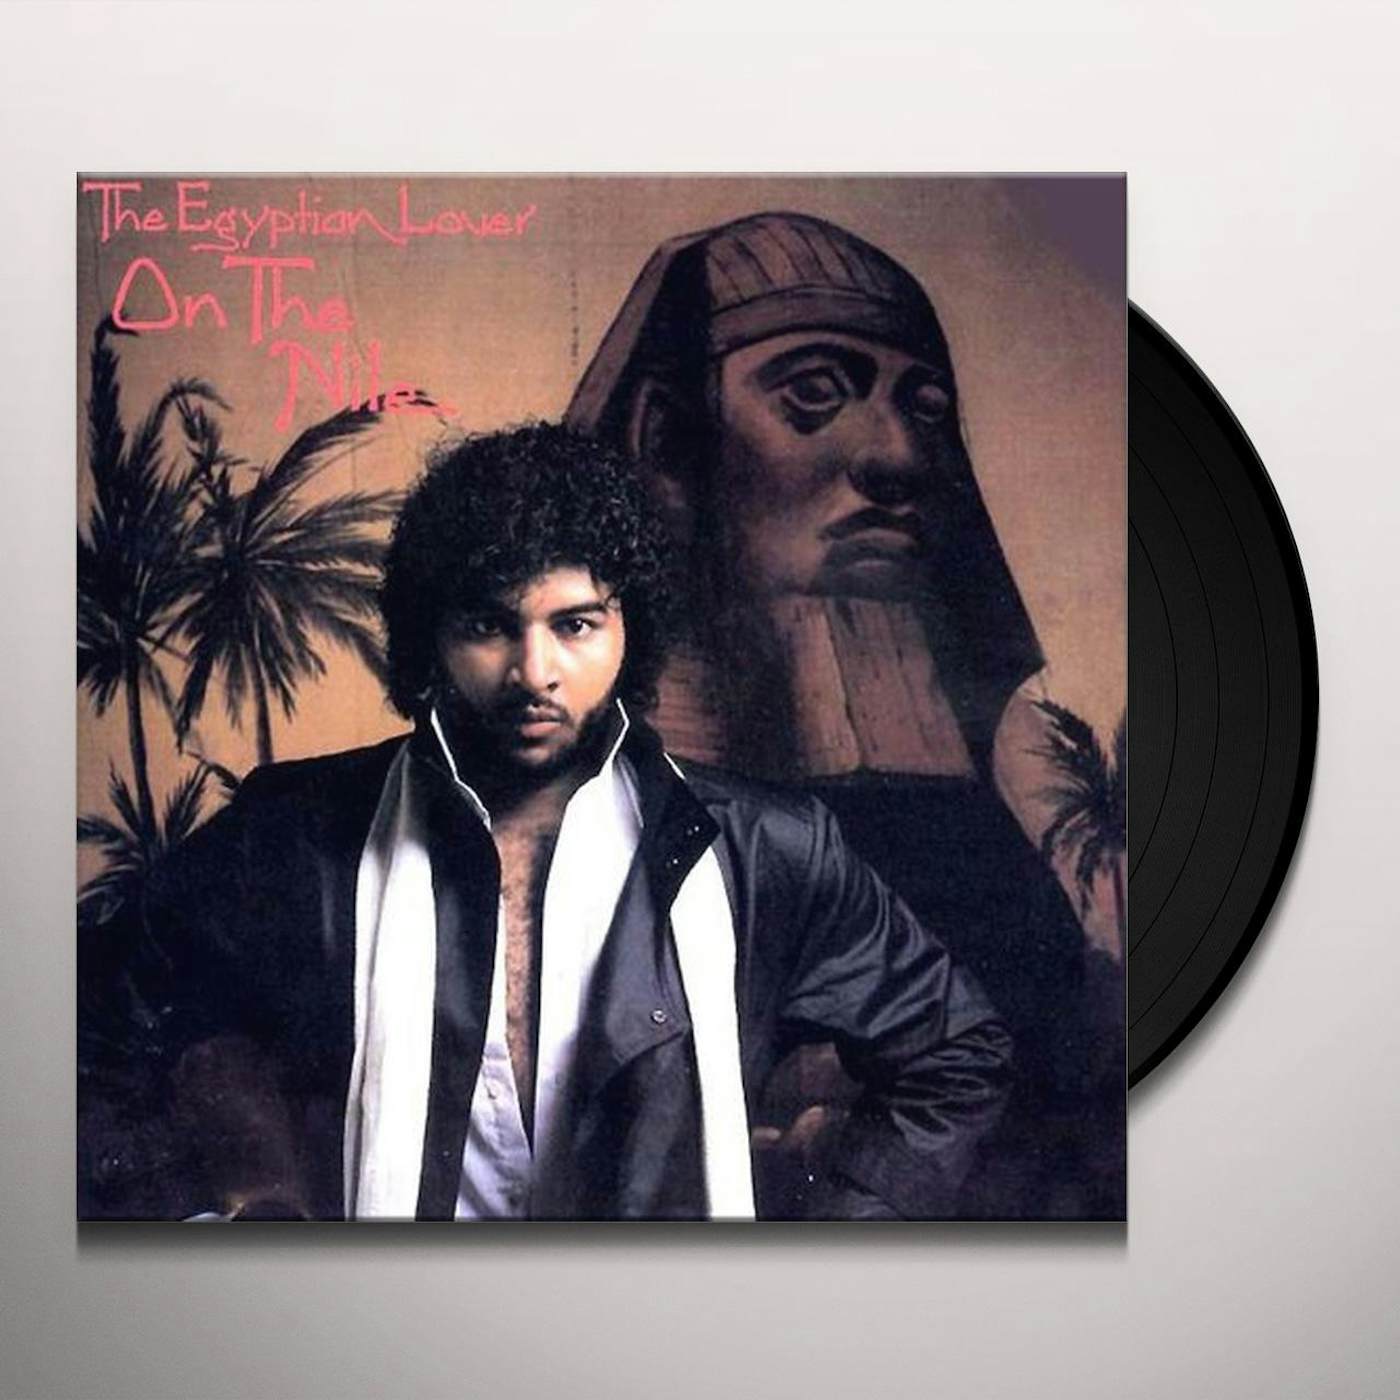 LET'S GET IT ON Vinyl Record - Egyptian Lover